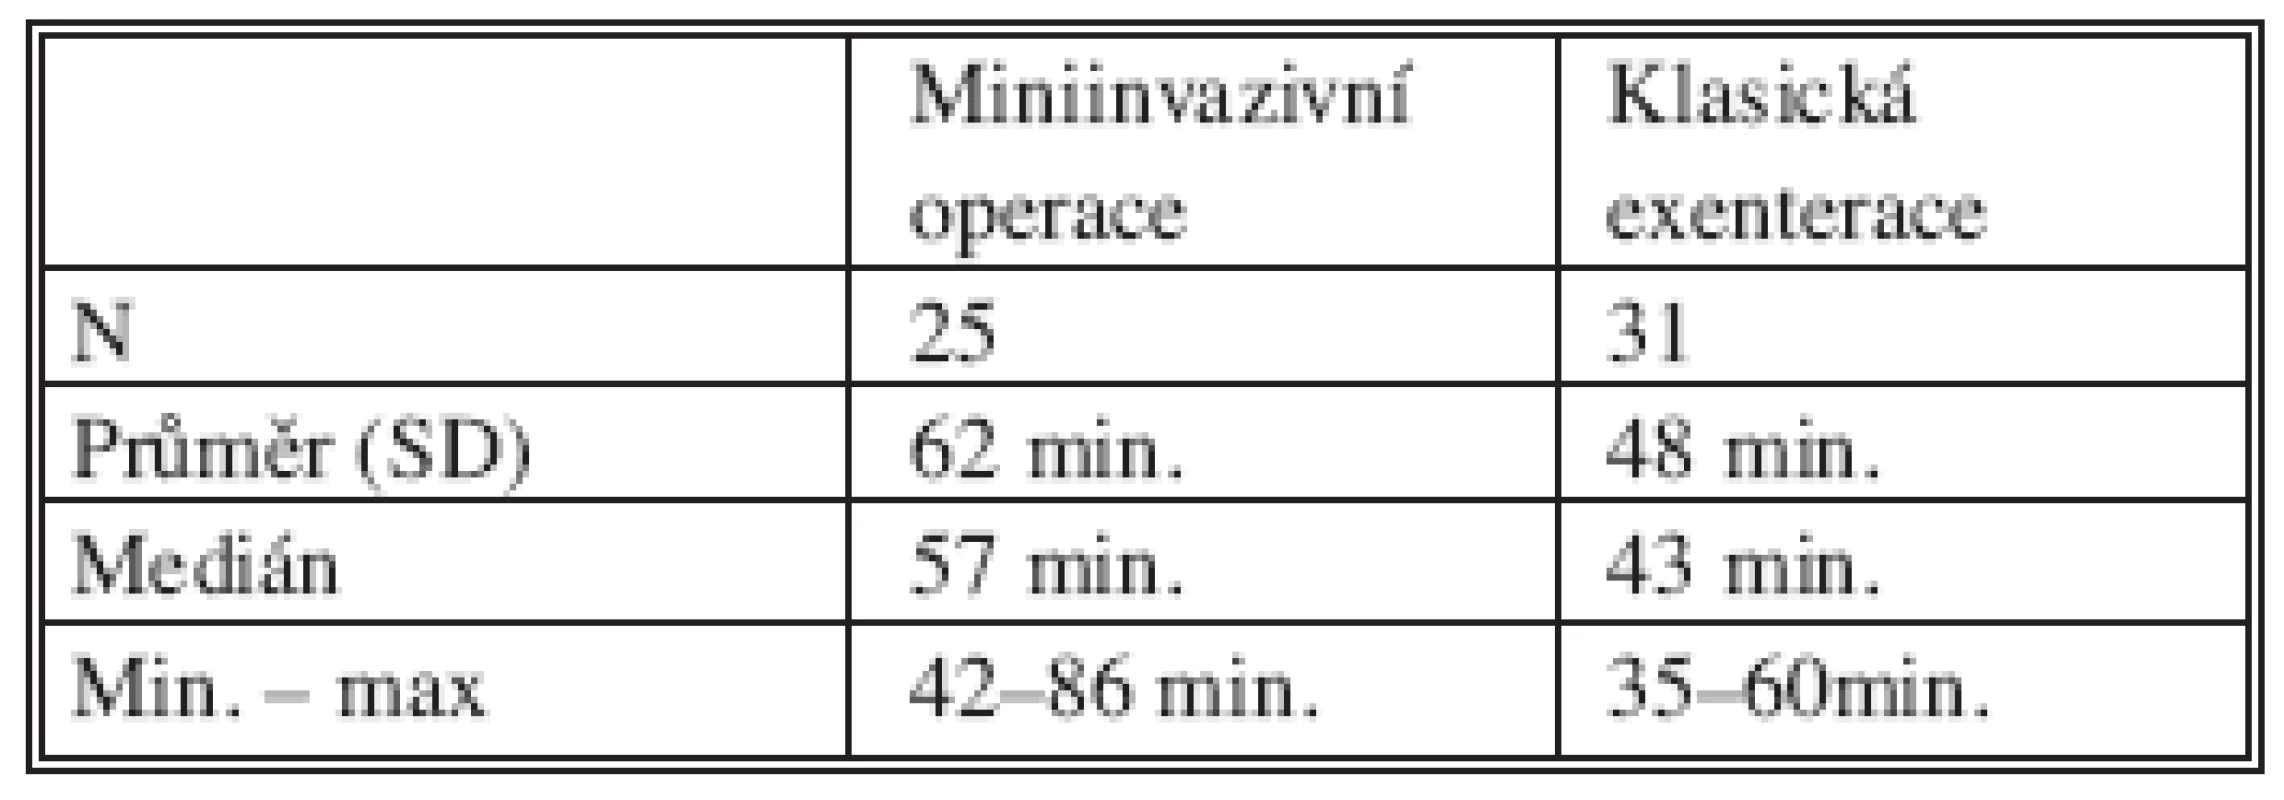 Délka operace
Tab. 7. Duration of surgical procedures